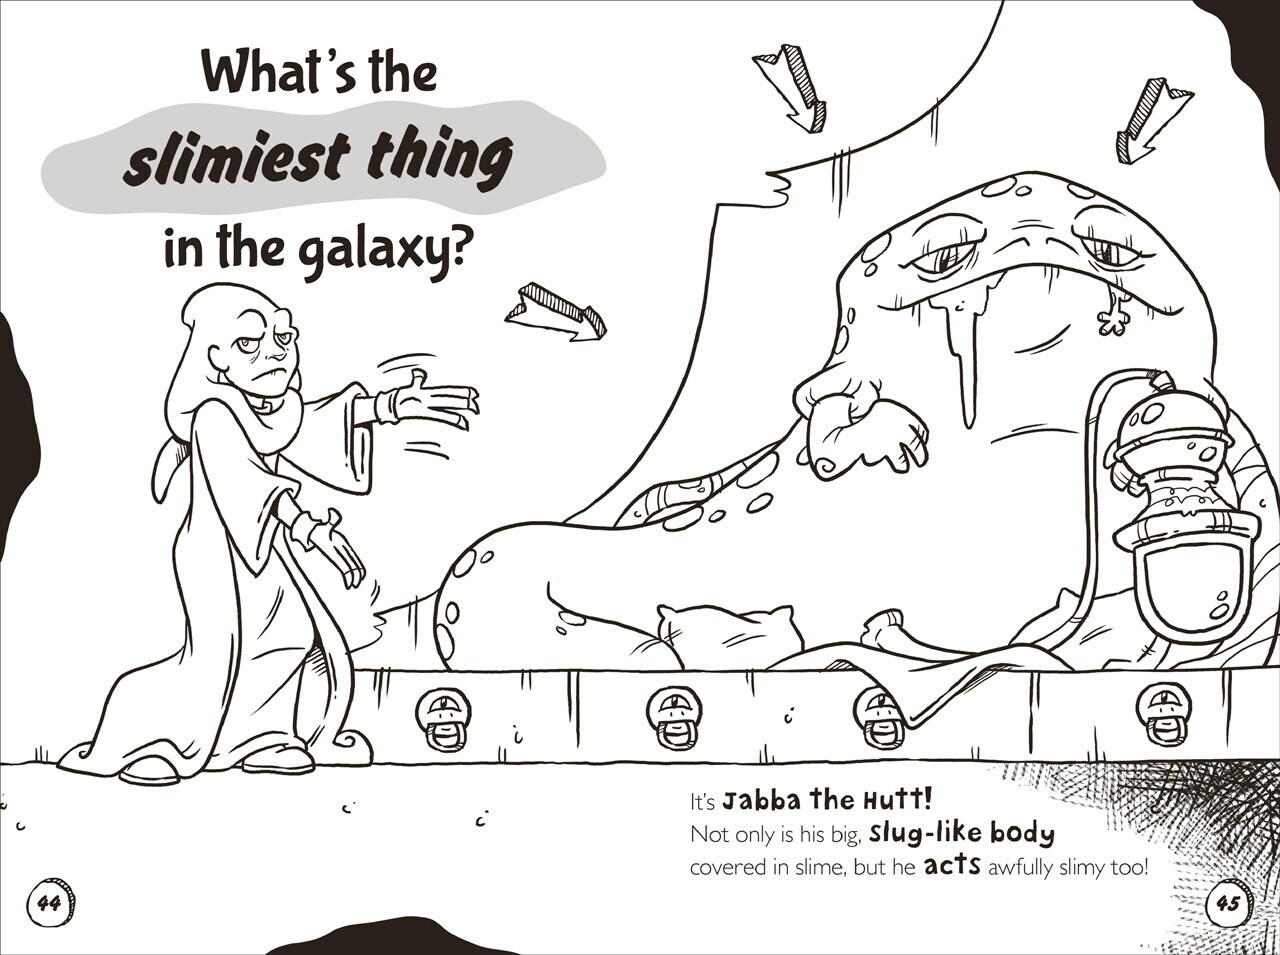 That Star Wars Book of Monsters, Ooze, and Slime spread on Jabba the Hutt